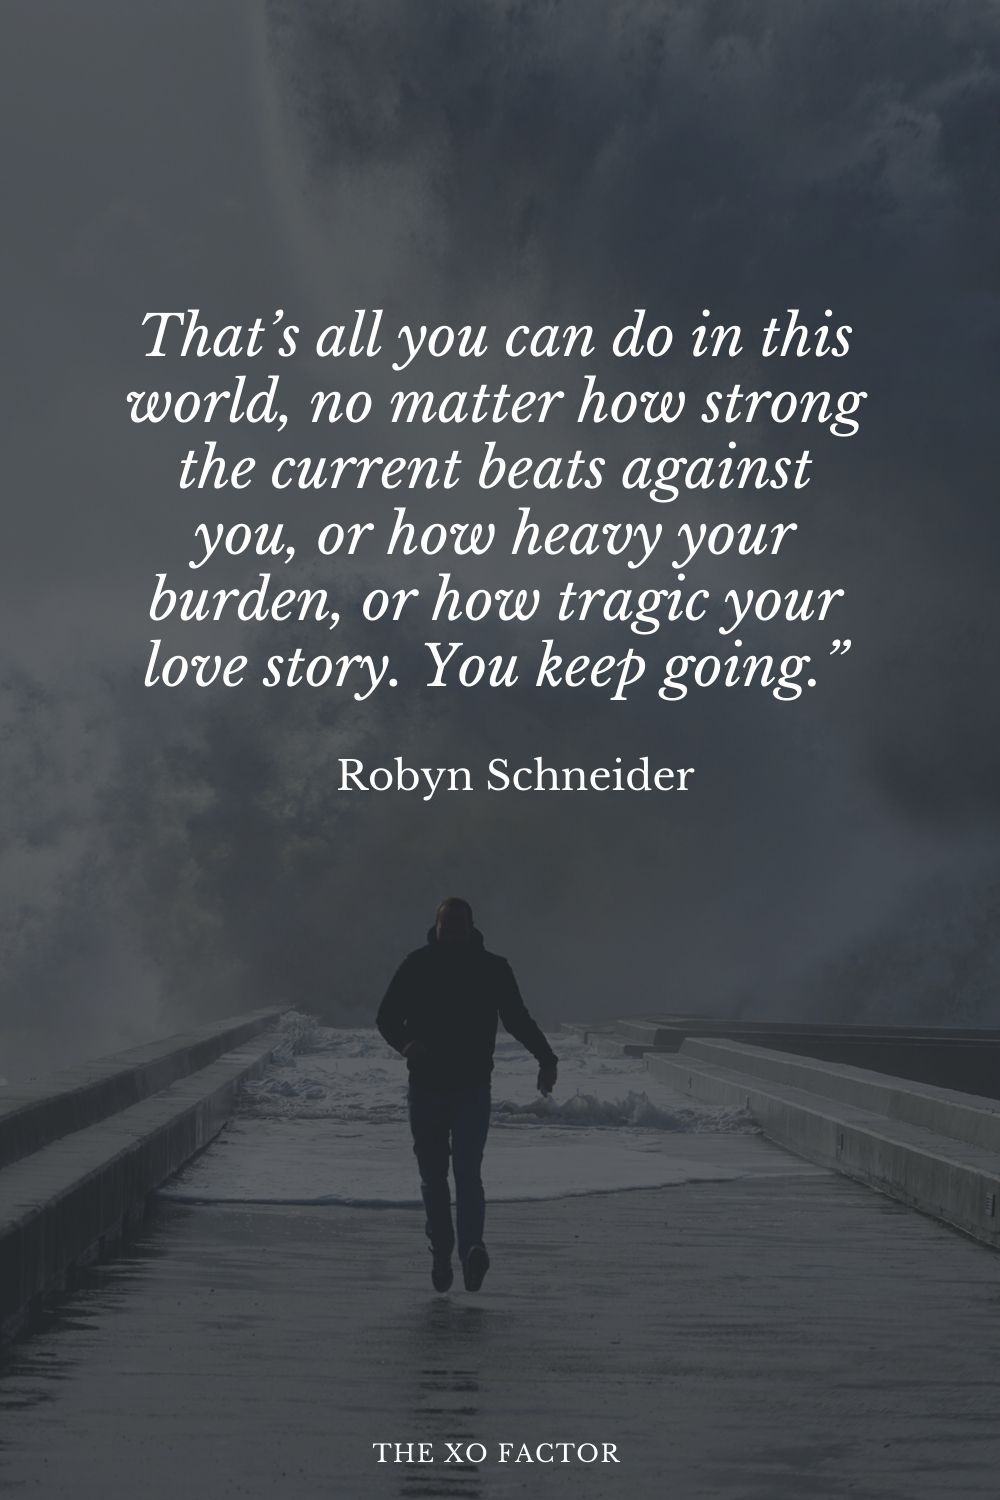 That’s all you can do in this world, no matter how strong the current beats against you, or how heavy your burden, or how tragic your love story. You keep going.” Robyn Schneider